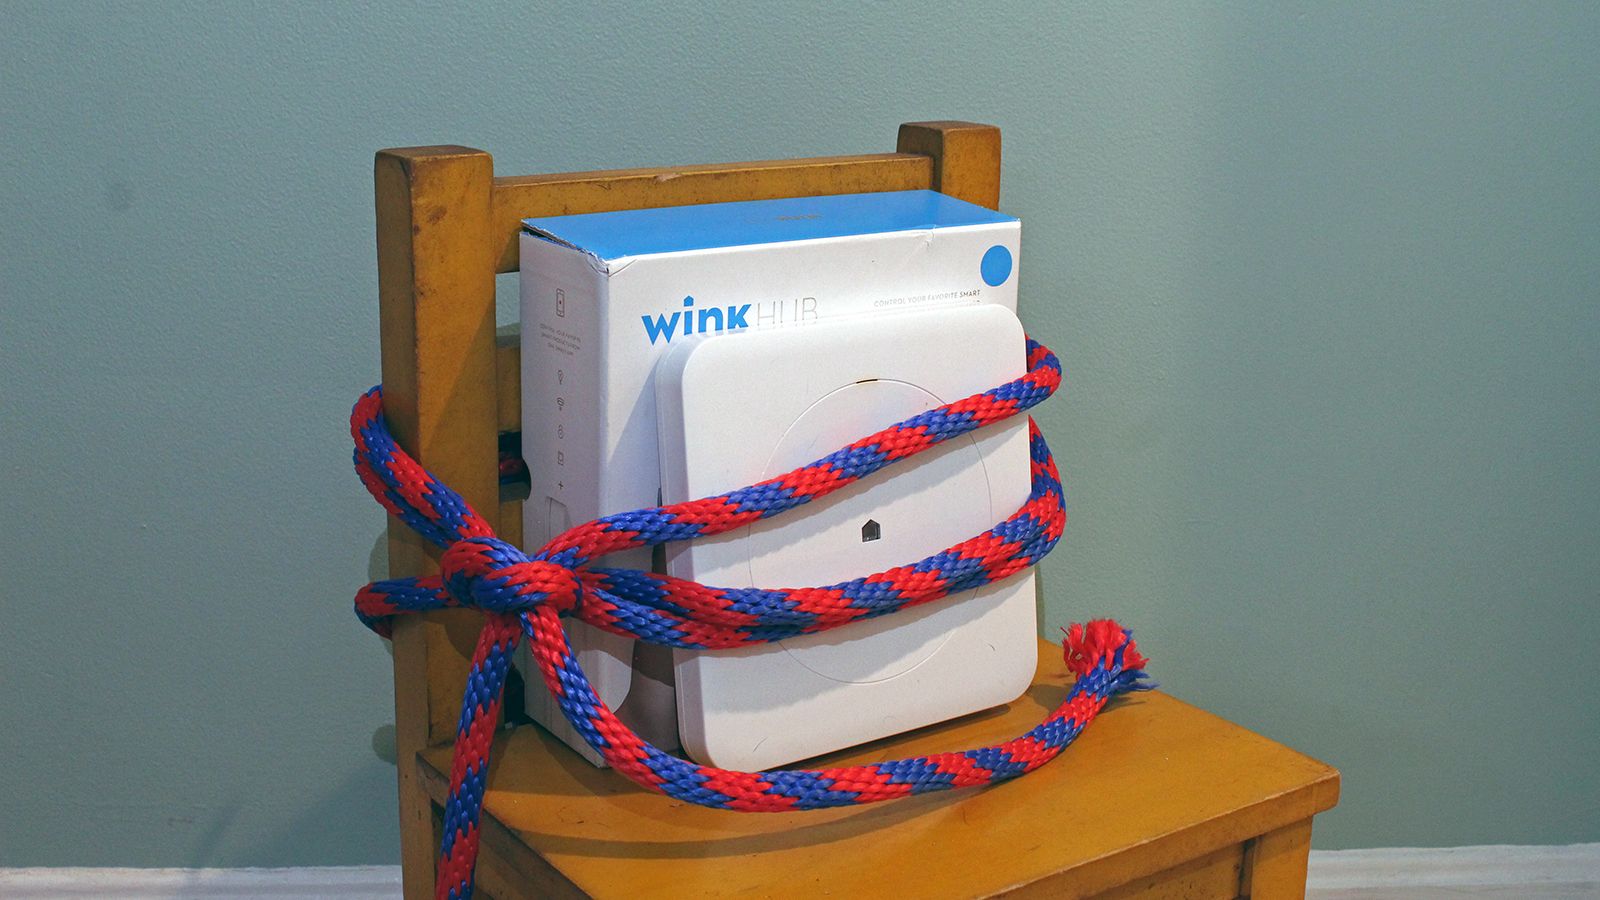 A Wink Hub tied up to a chair.